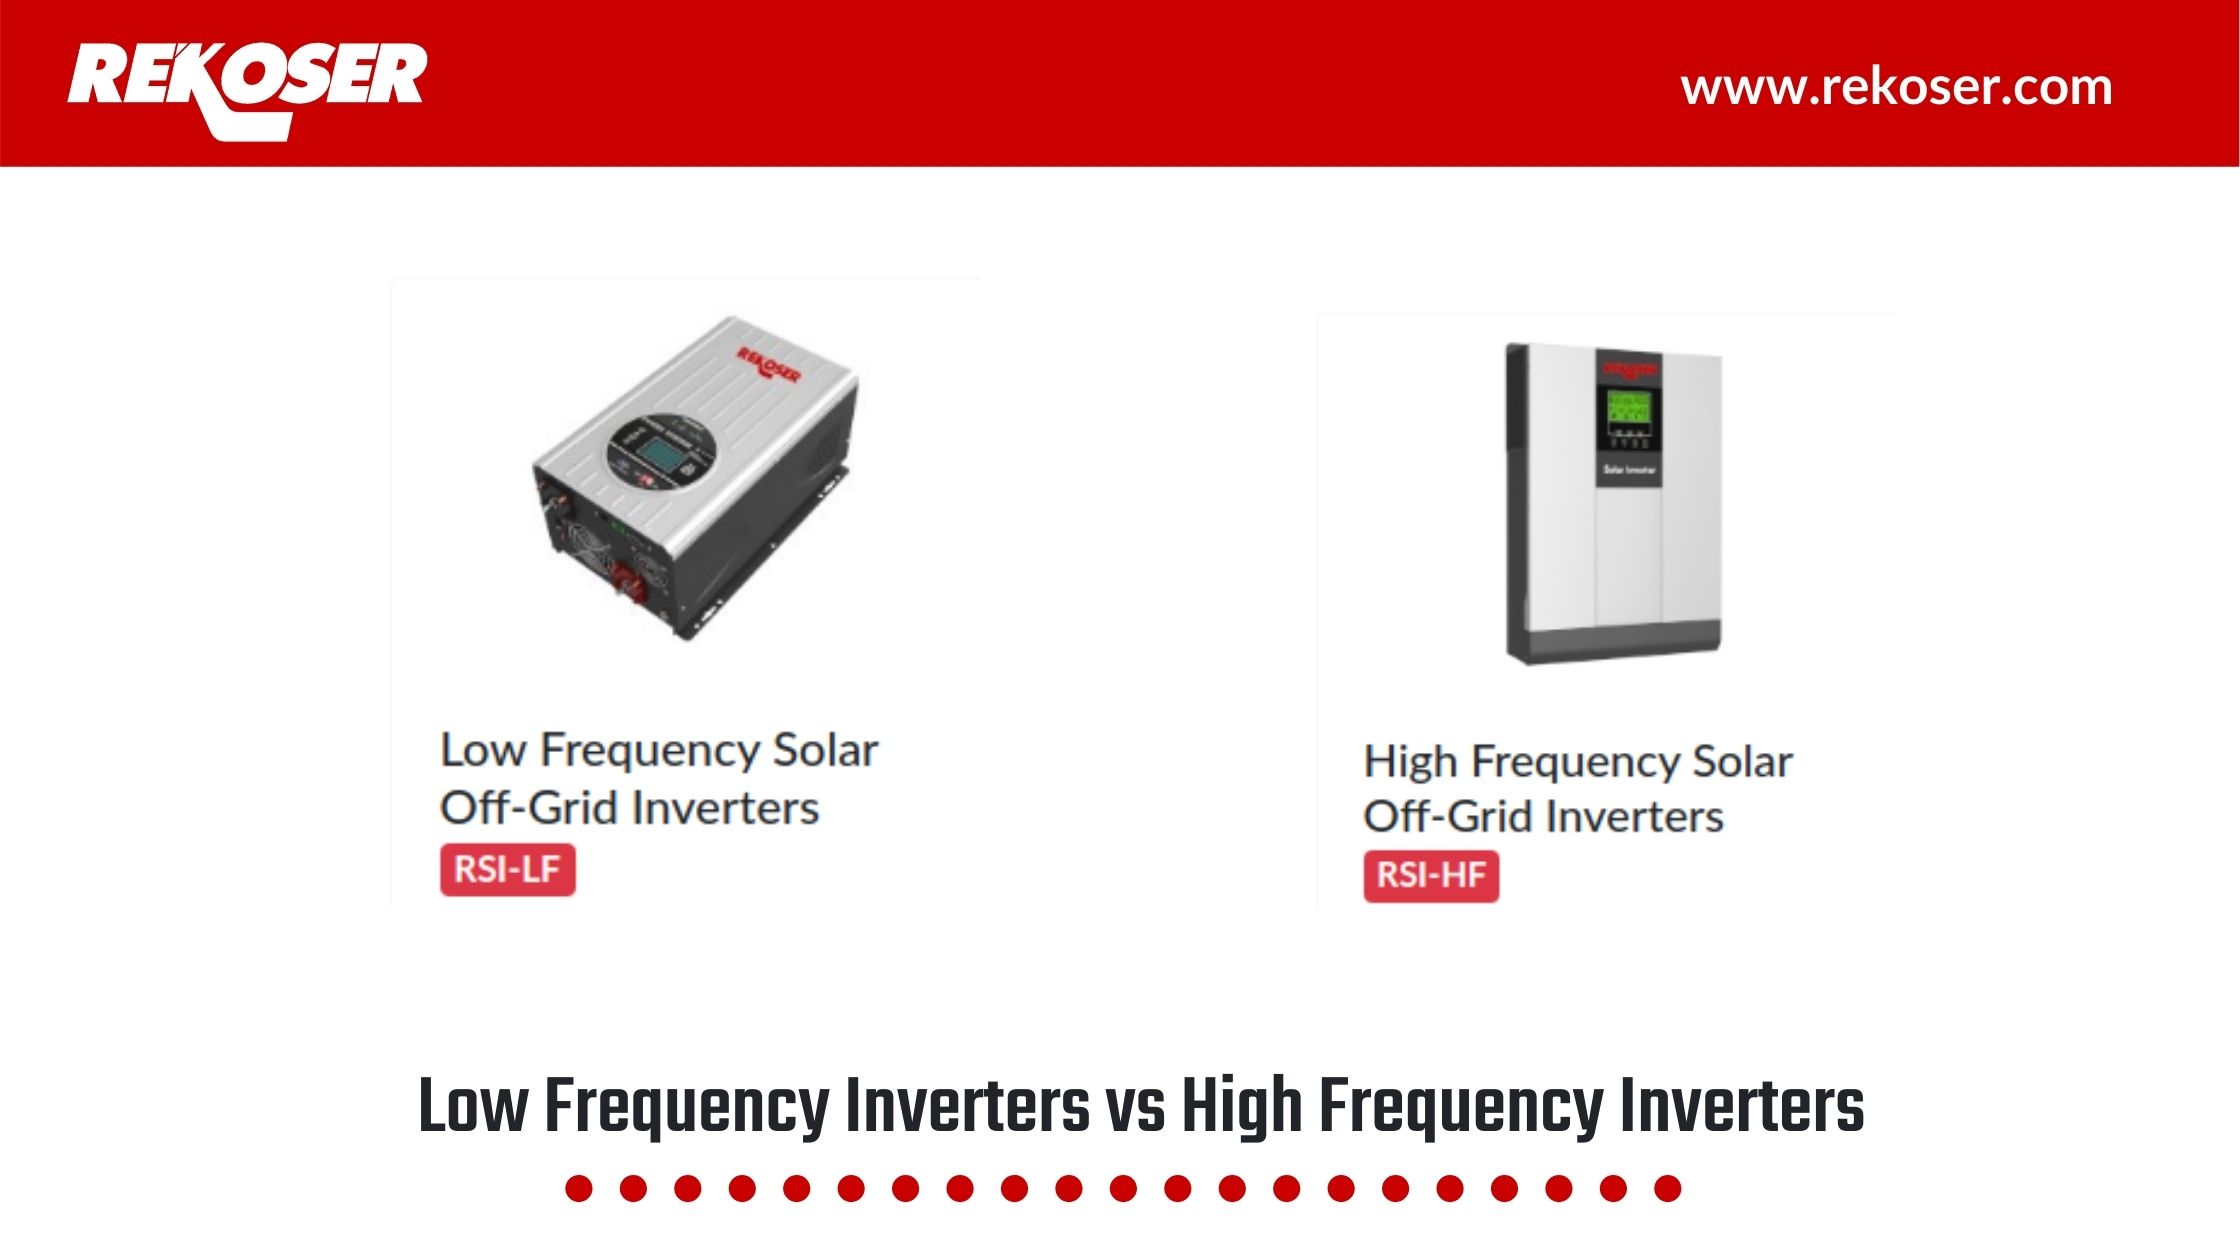 Differences between Low Frequency (LF) Inverters and High Frequency (HF) Inverters